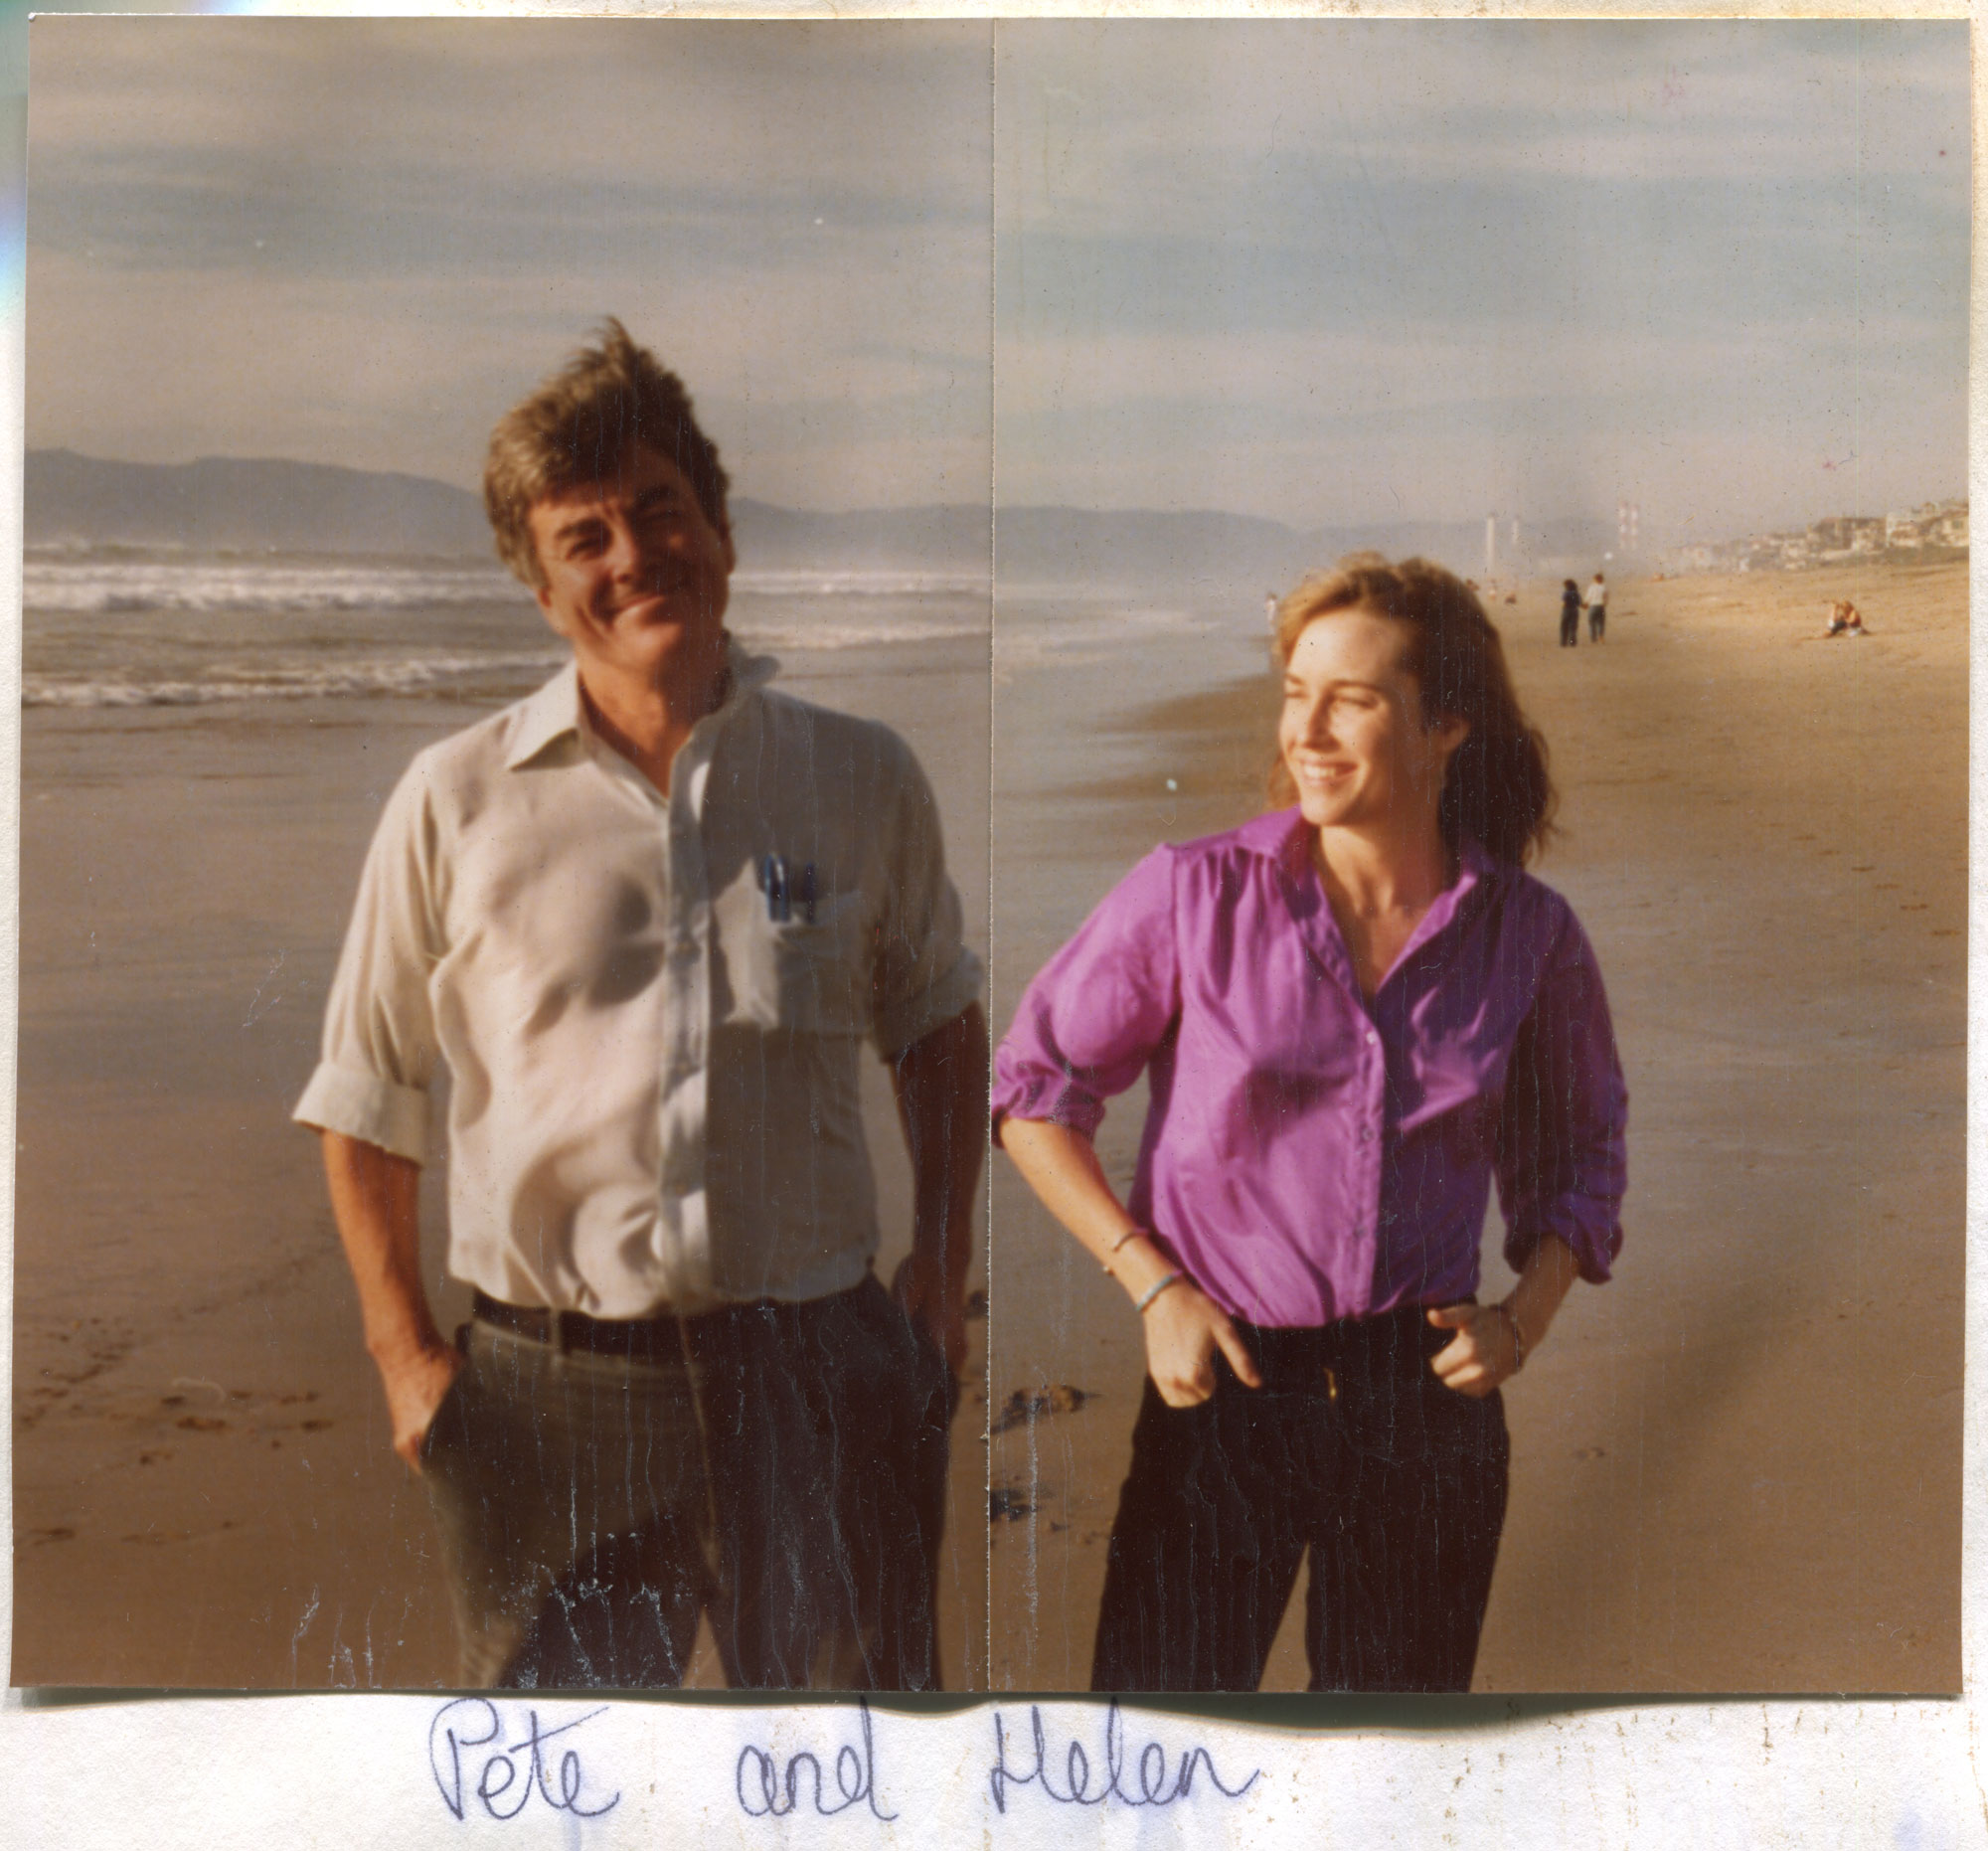 Man and woman stand smiling on beach with names written below photograph